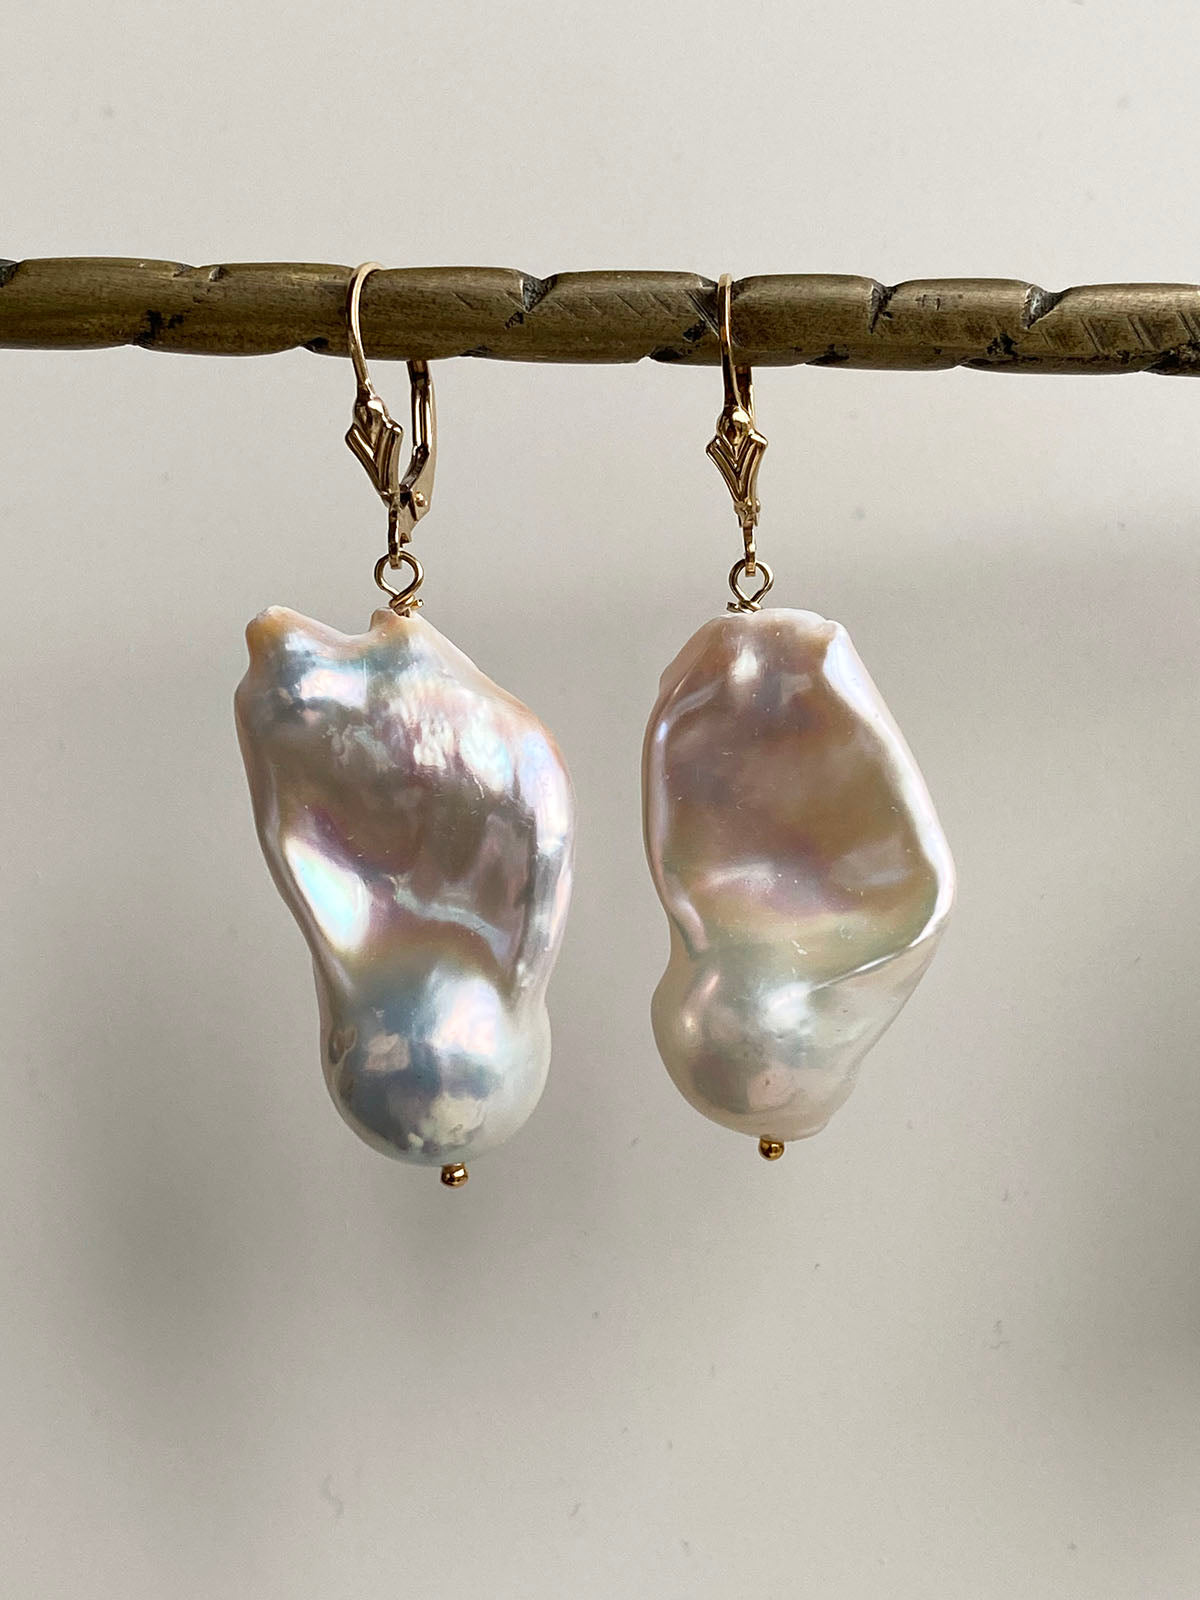 17-32mm Iridescent White Freshwater Fireballs with a Pink Flash on 14k GF Wires by Linda Queally